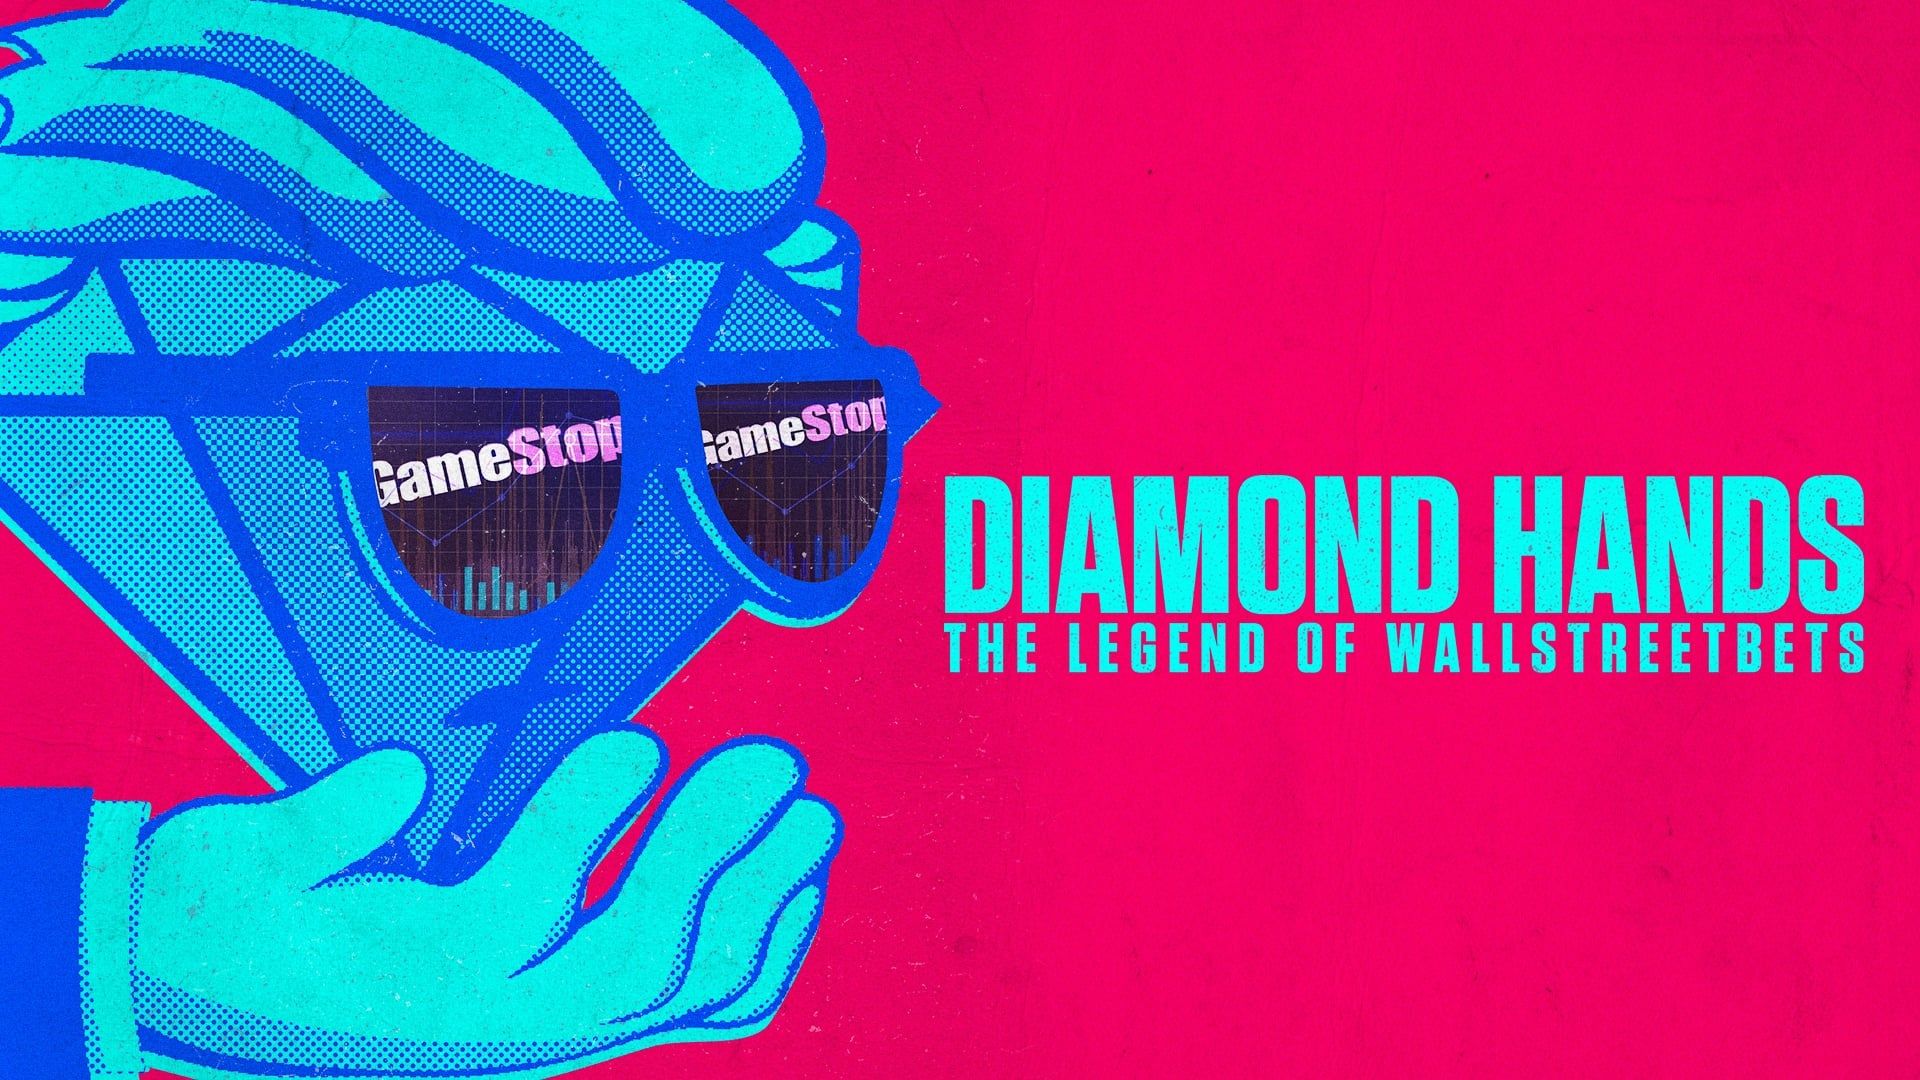 Diamond Hands: The Legend of WallStreetBets background